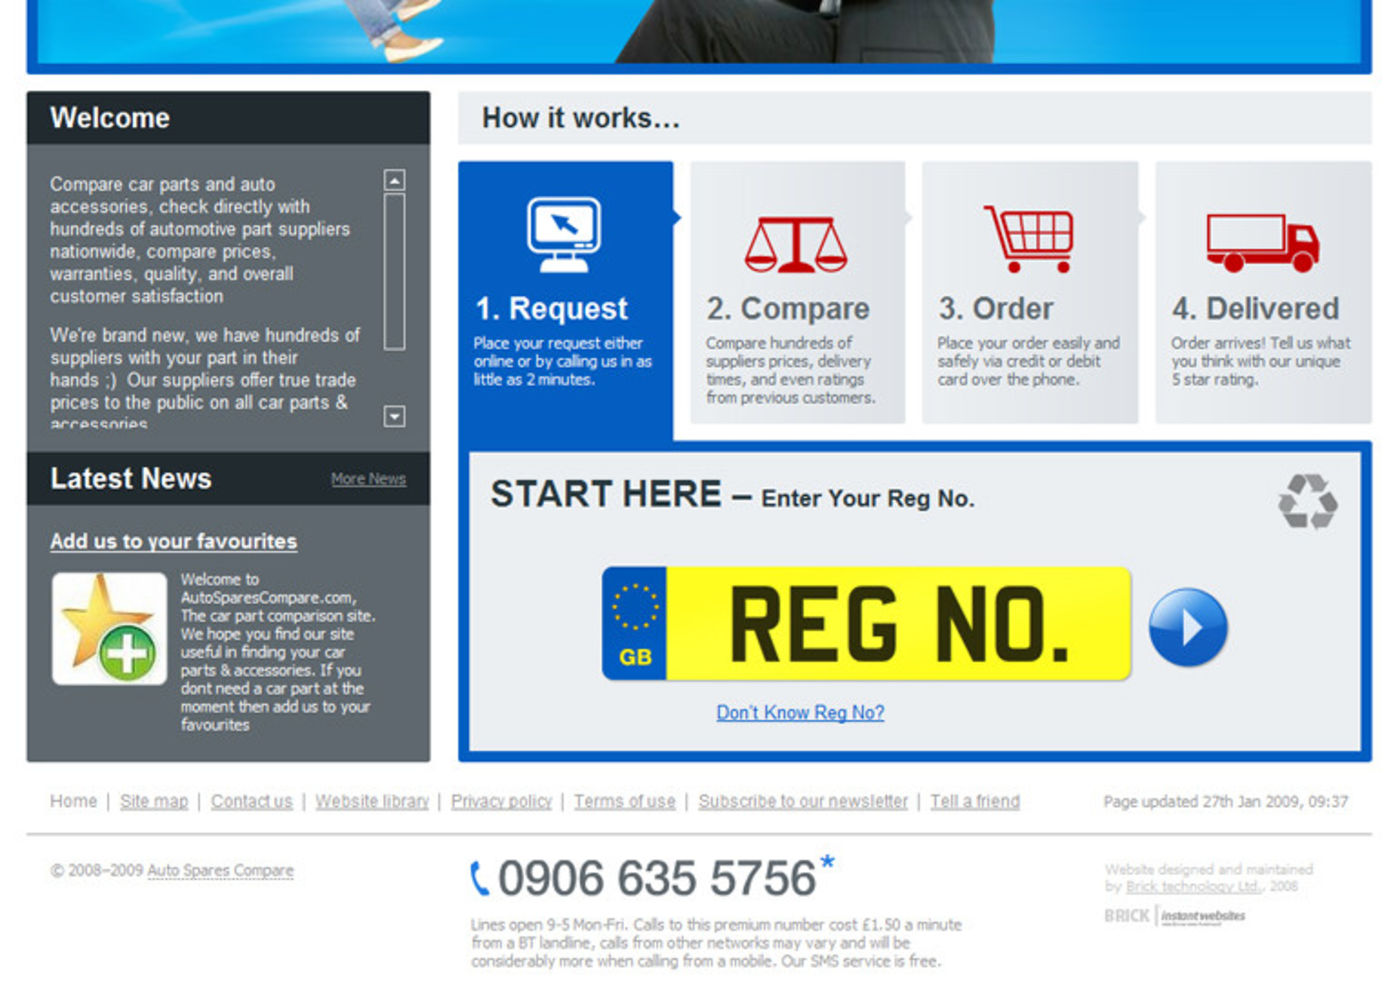 Auto Spares Compare Homepage footer